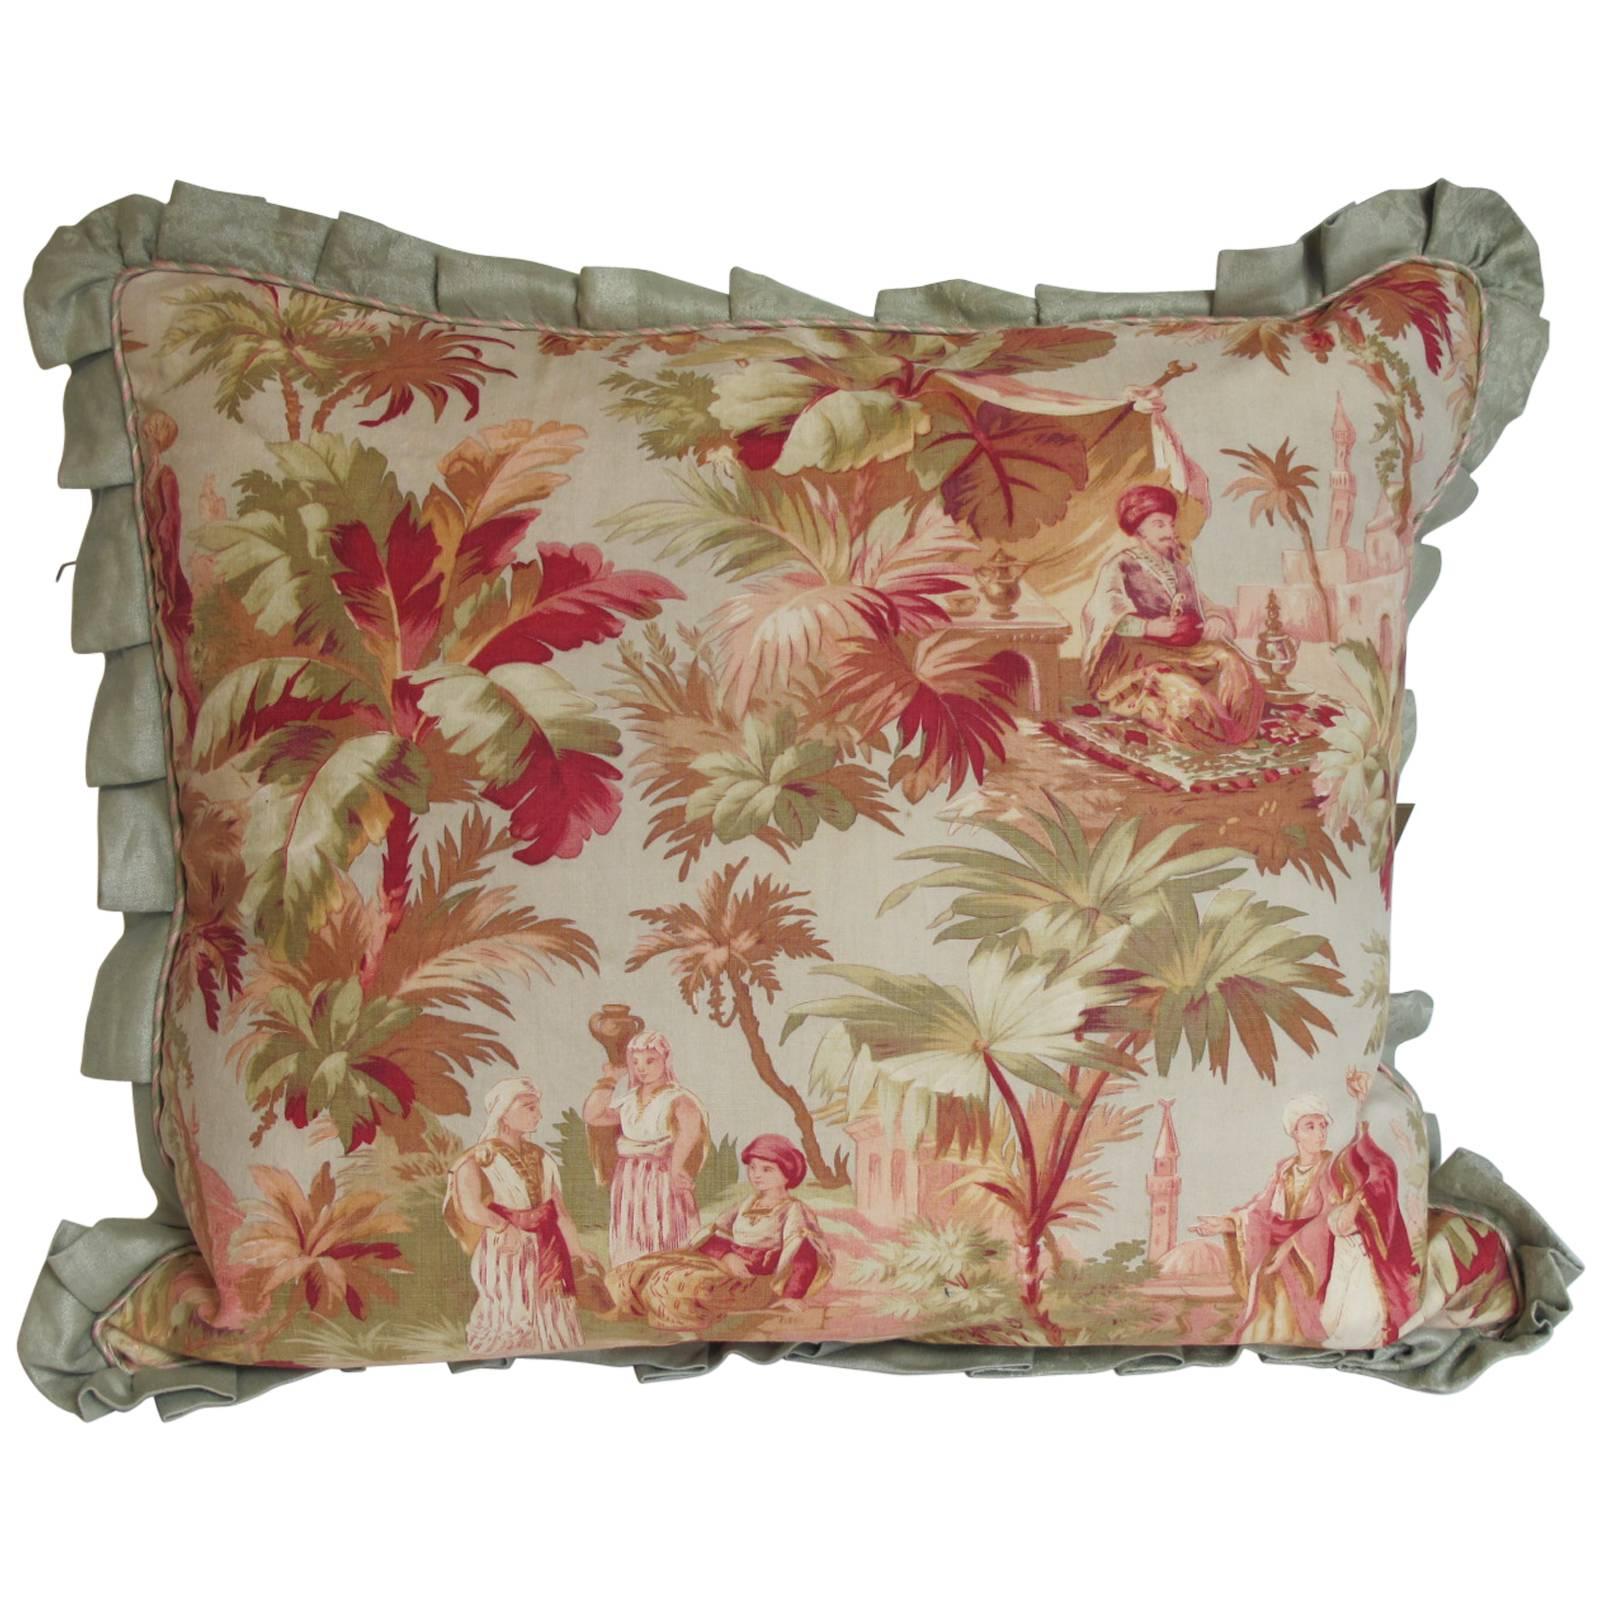 19th Century French Fabric Pillow by Mary Jane McCarty